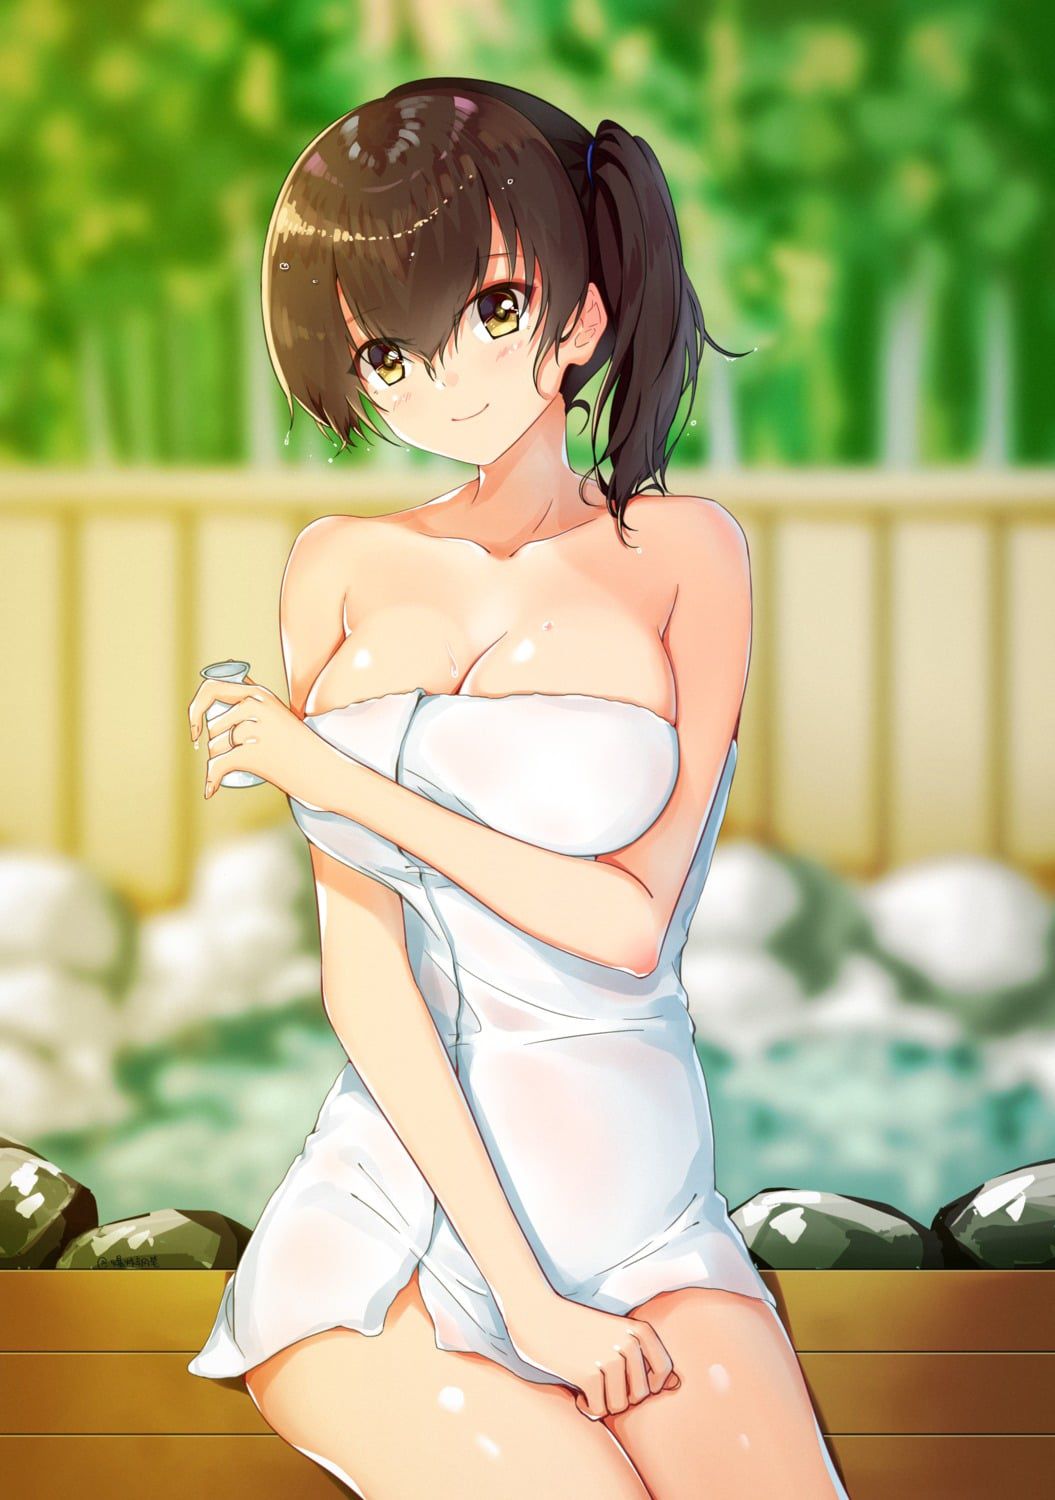 Let's gaze at the bath scene of a defenseless girl during relaxation time! 29